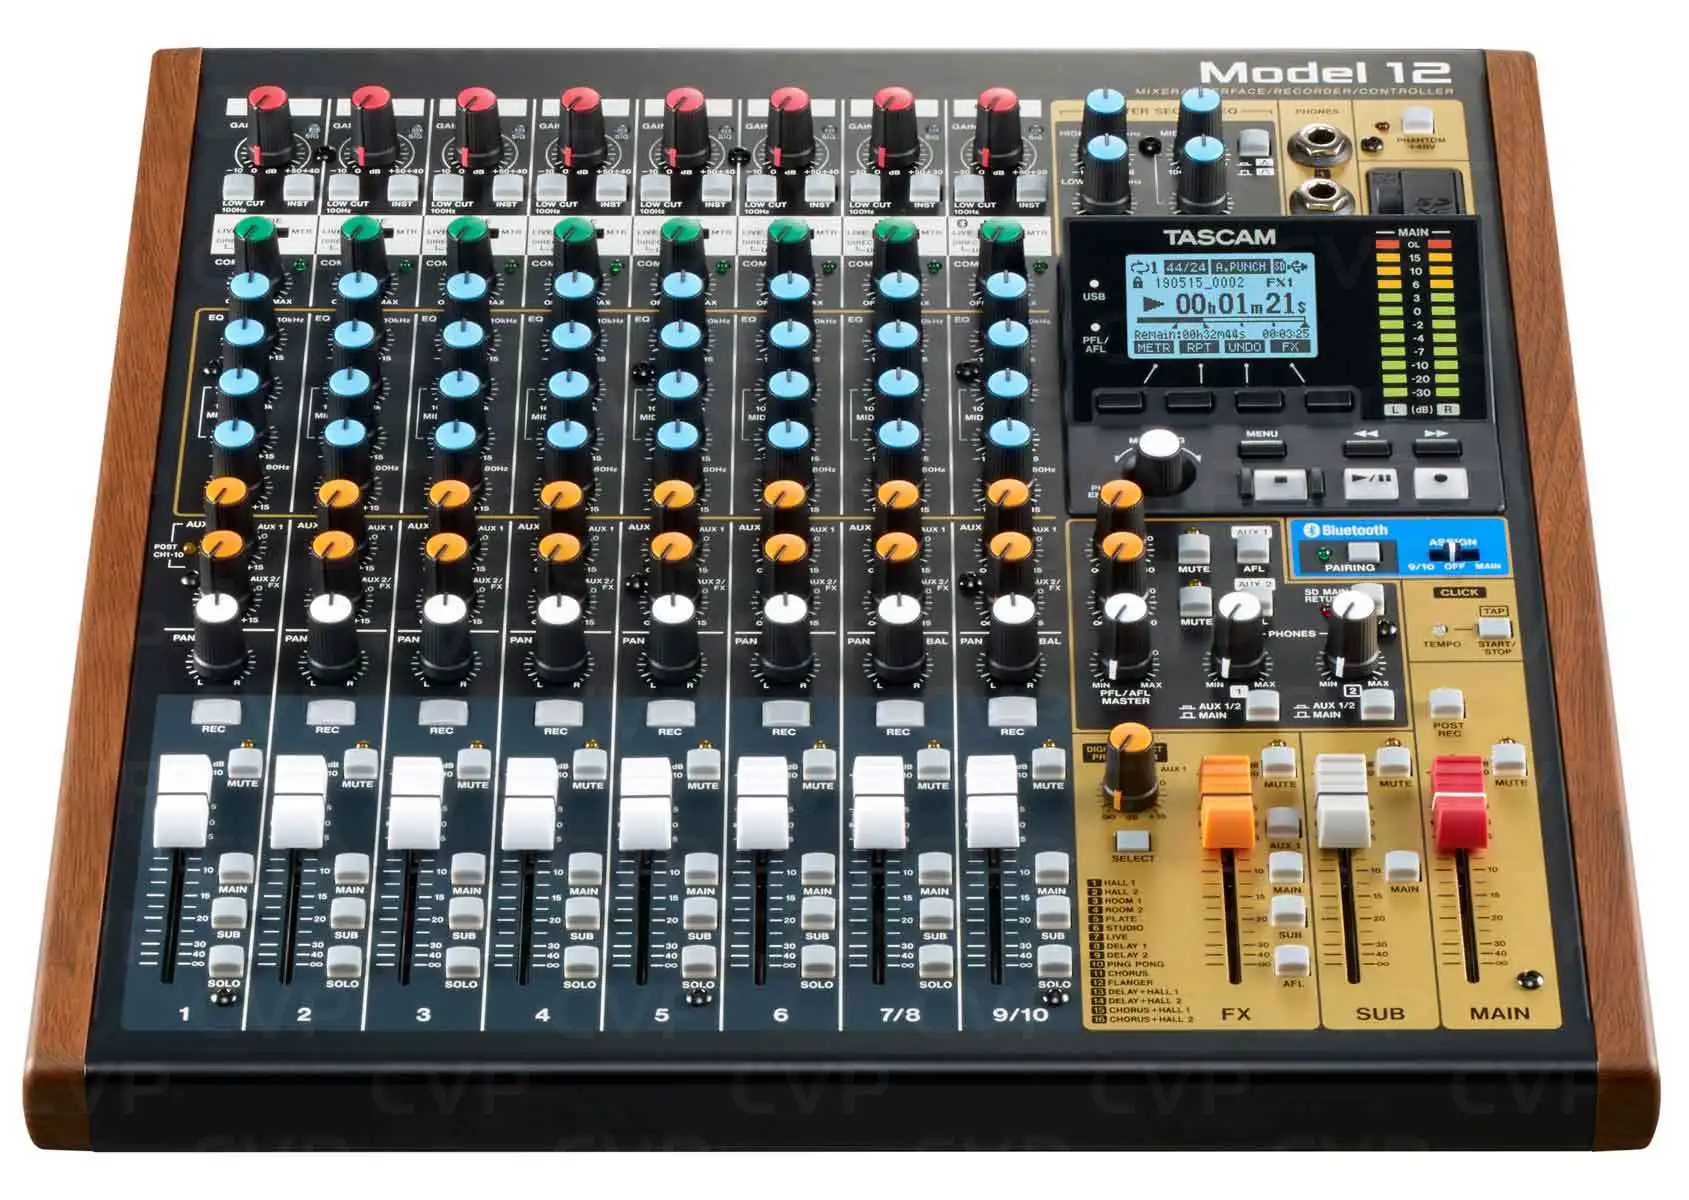 

QUALITY VALUE SALES TASCAM Model 12 Mixer / Interface / Recorder / Controller